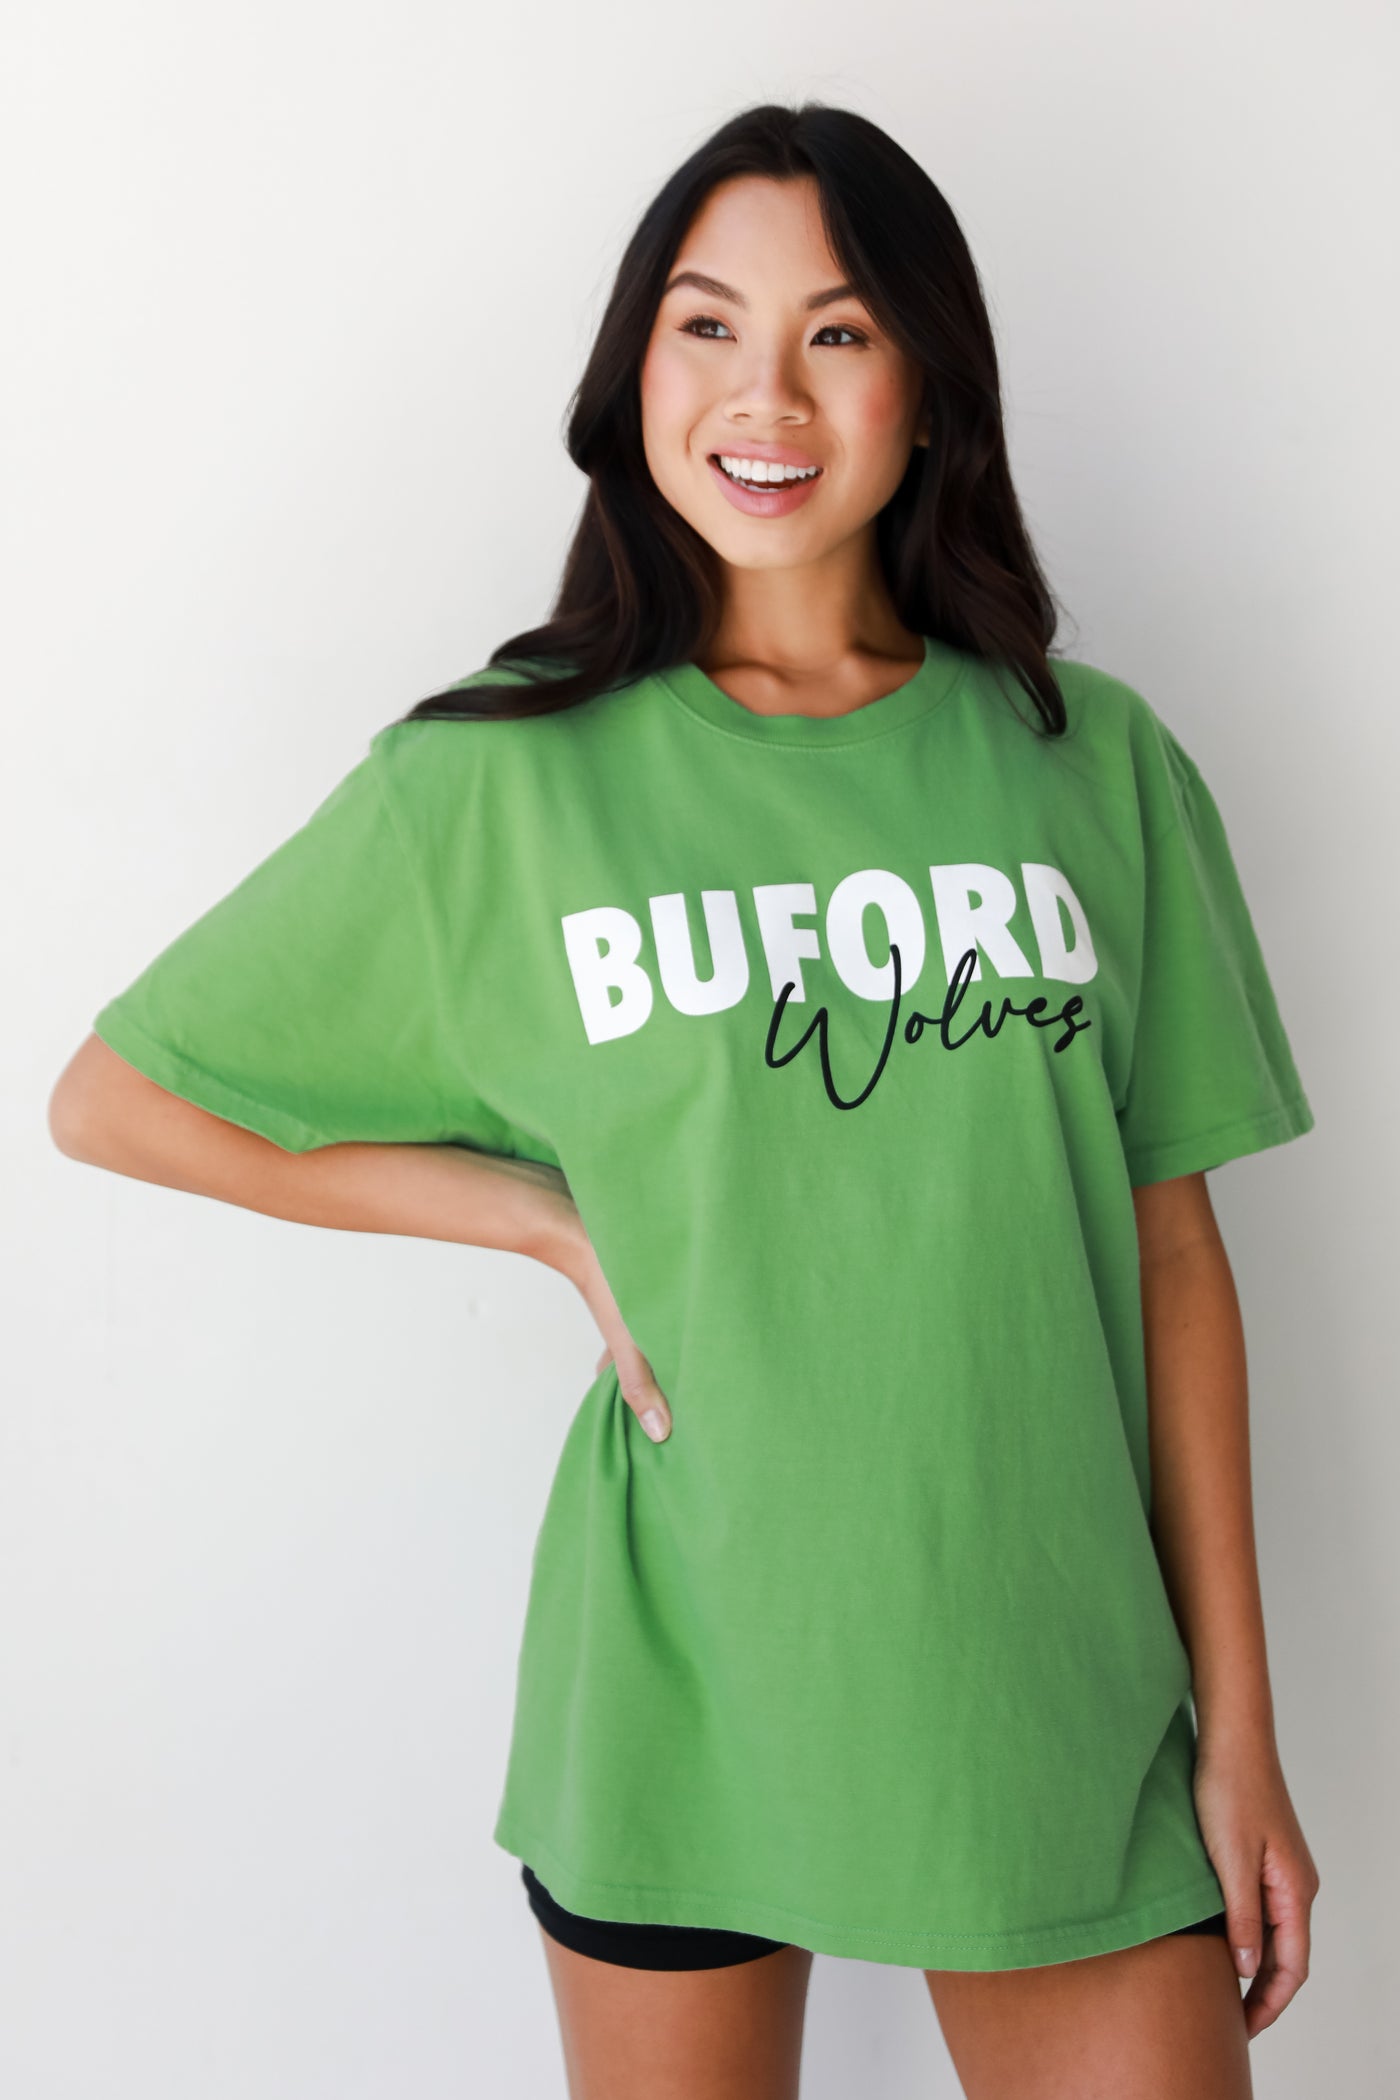 Green Buford Wolves Tee on model